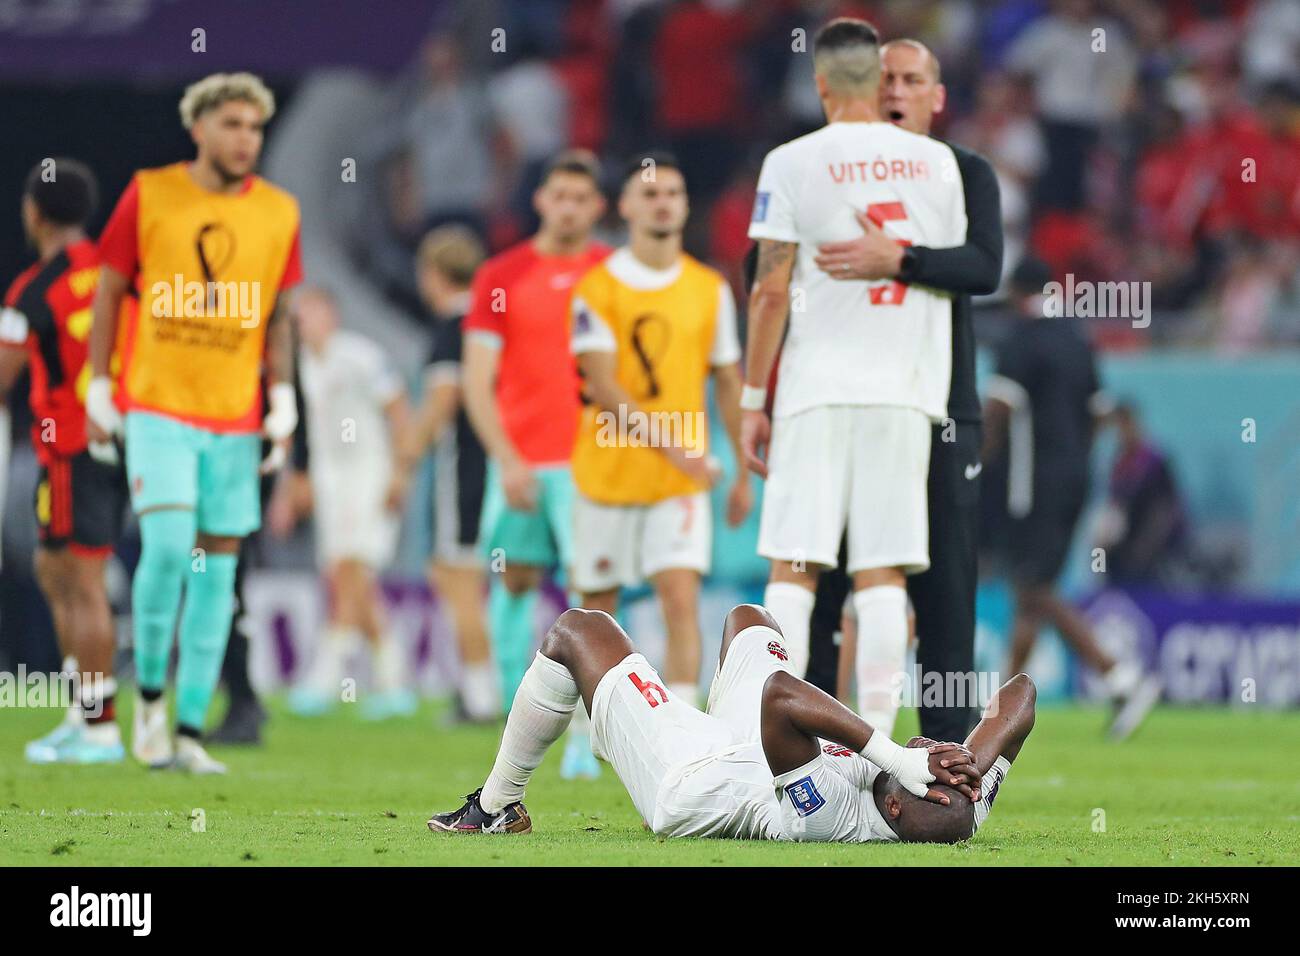 Doha, Qatar. 23rd Nov, 2022. Kamal Miller of Canada, regrets the defeat after the match between Belgium and Canada, for the 1st round of Group F of the FIFA World Cup Qatar 2022, Ahmed bin Ali Stadium this Wednesday 23. 30761 (Heuler Andrey/SPP) Credit: SPP Sport Press Photo. /Alamy Live News Stock Photo